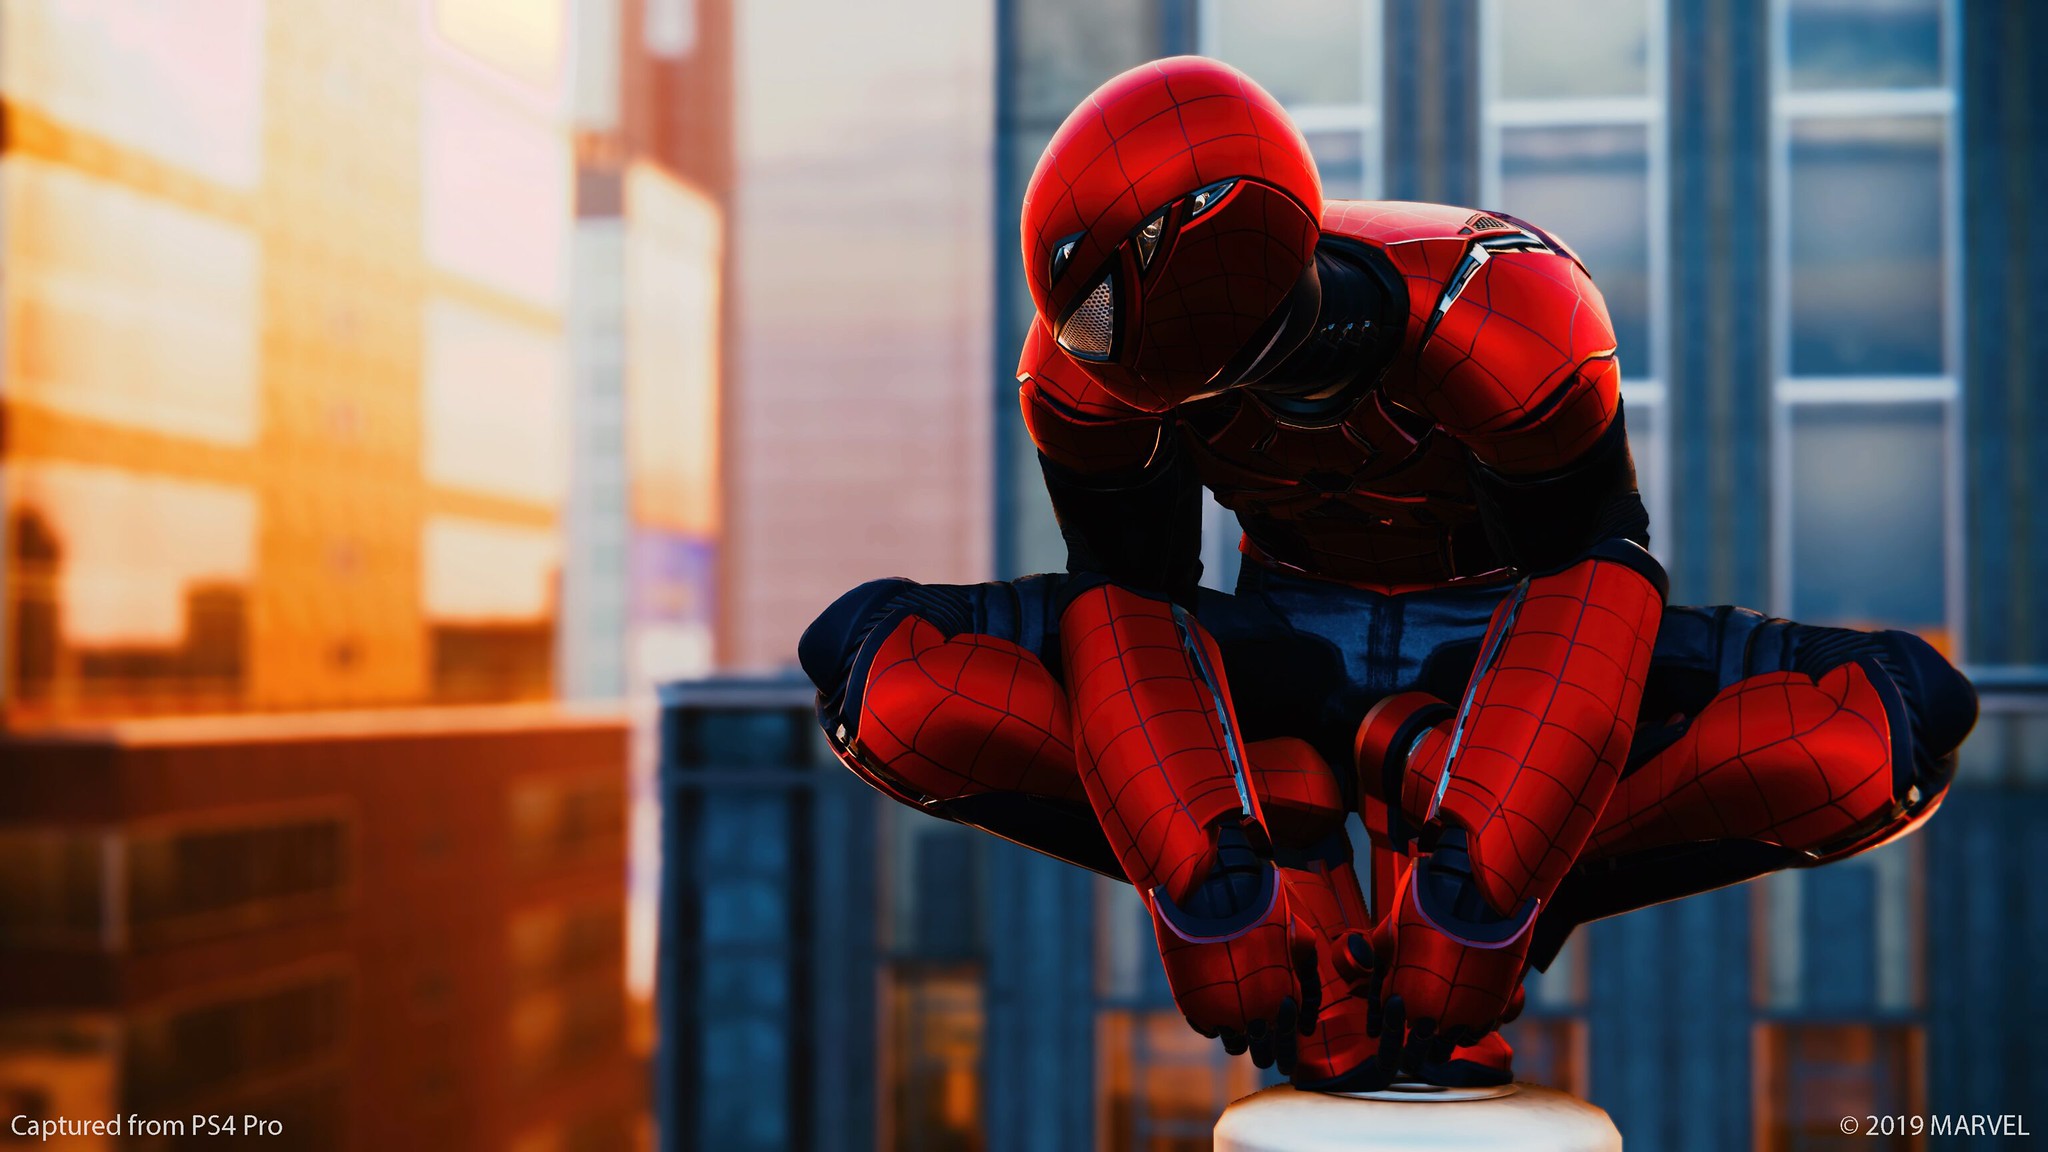 Marvel's Spider-Man: Photo Mode on PS4